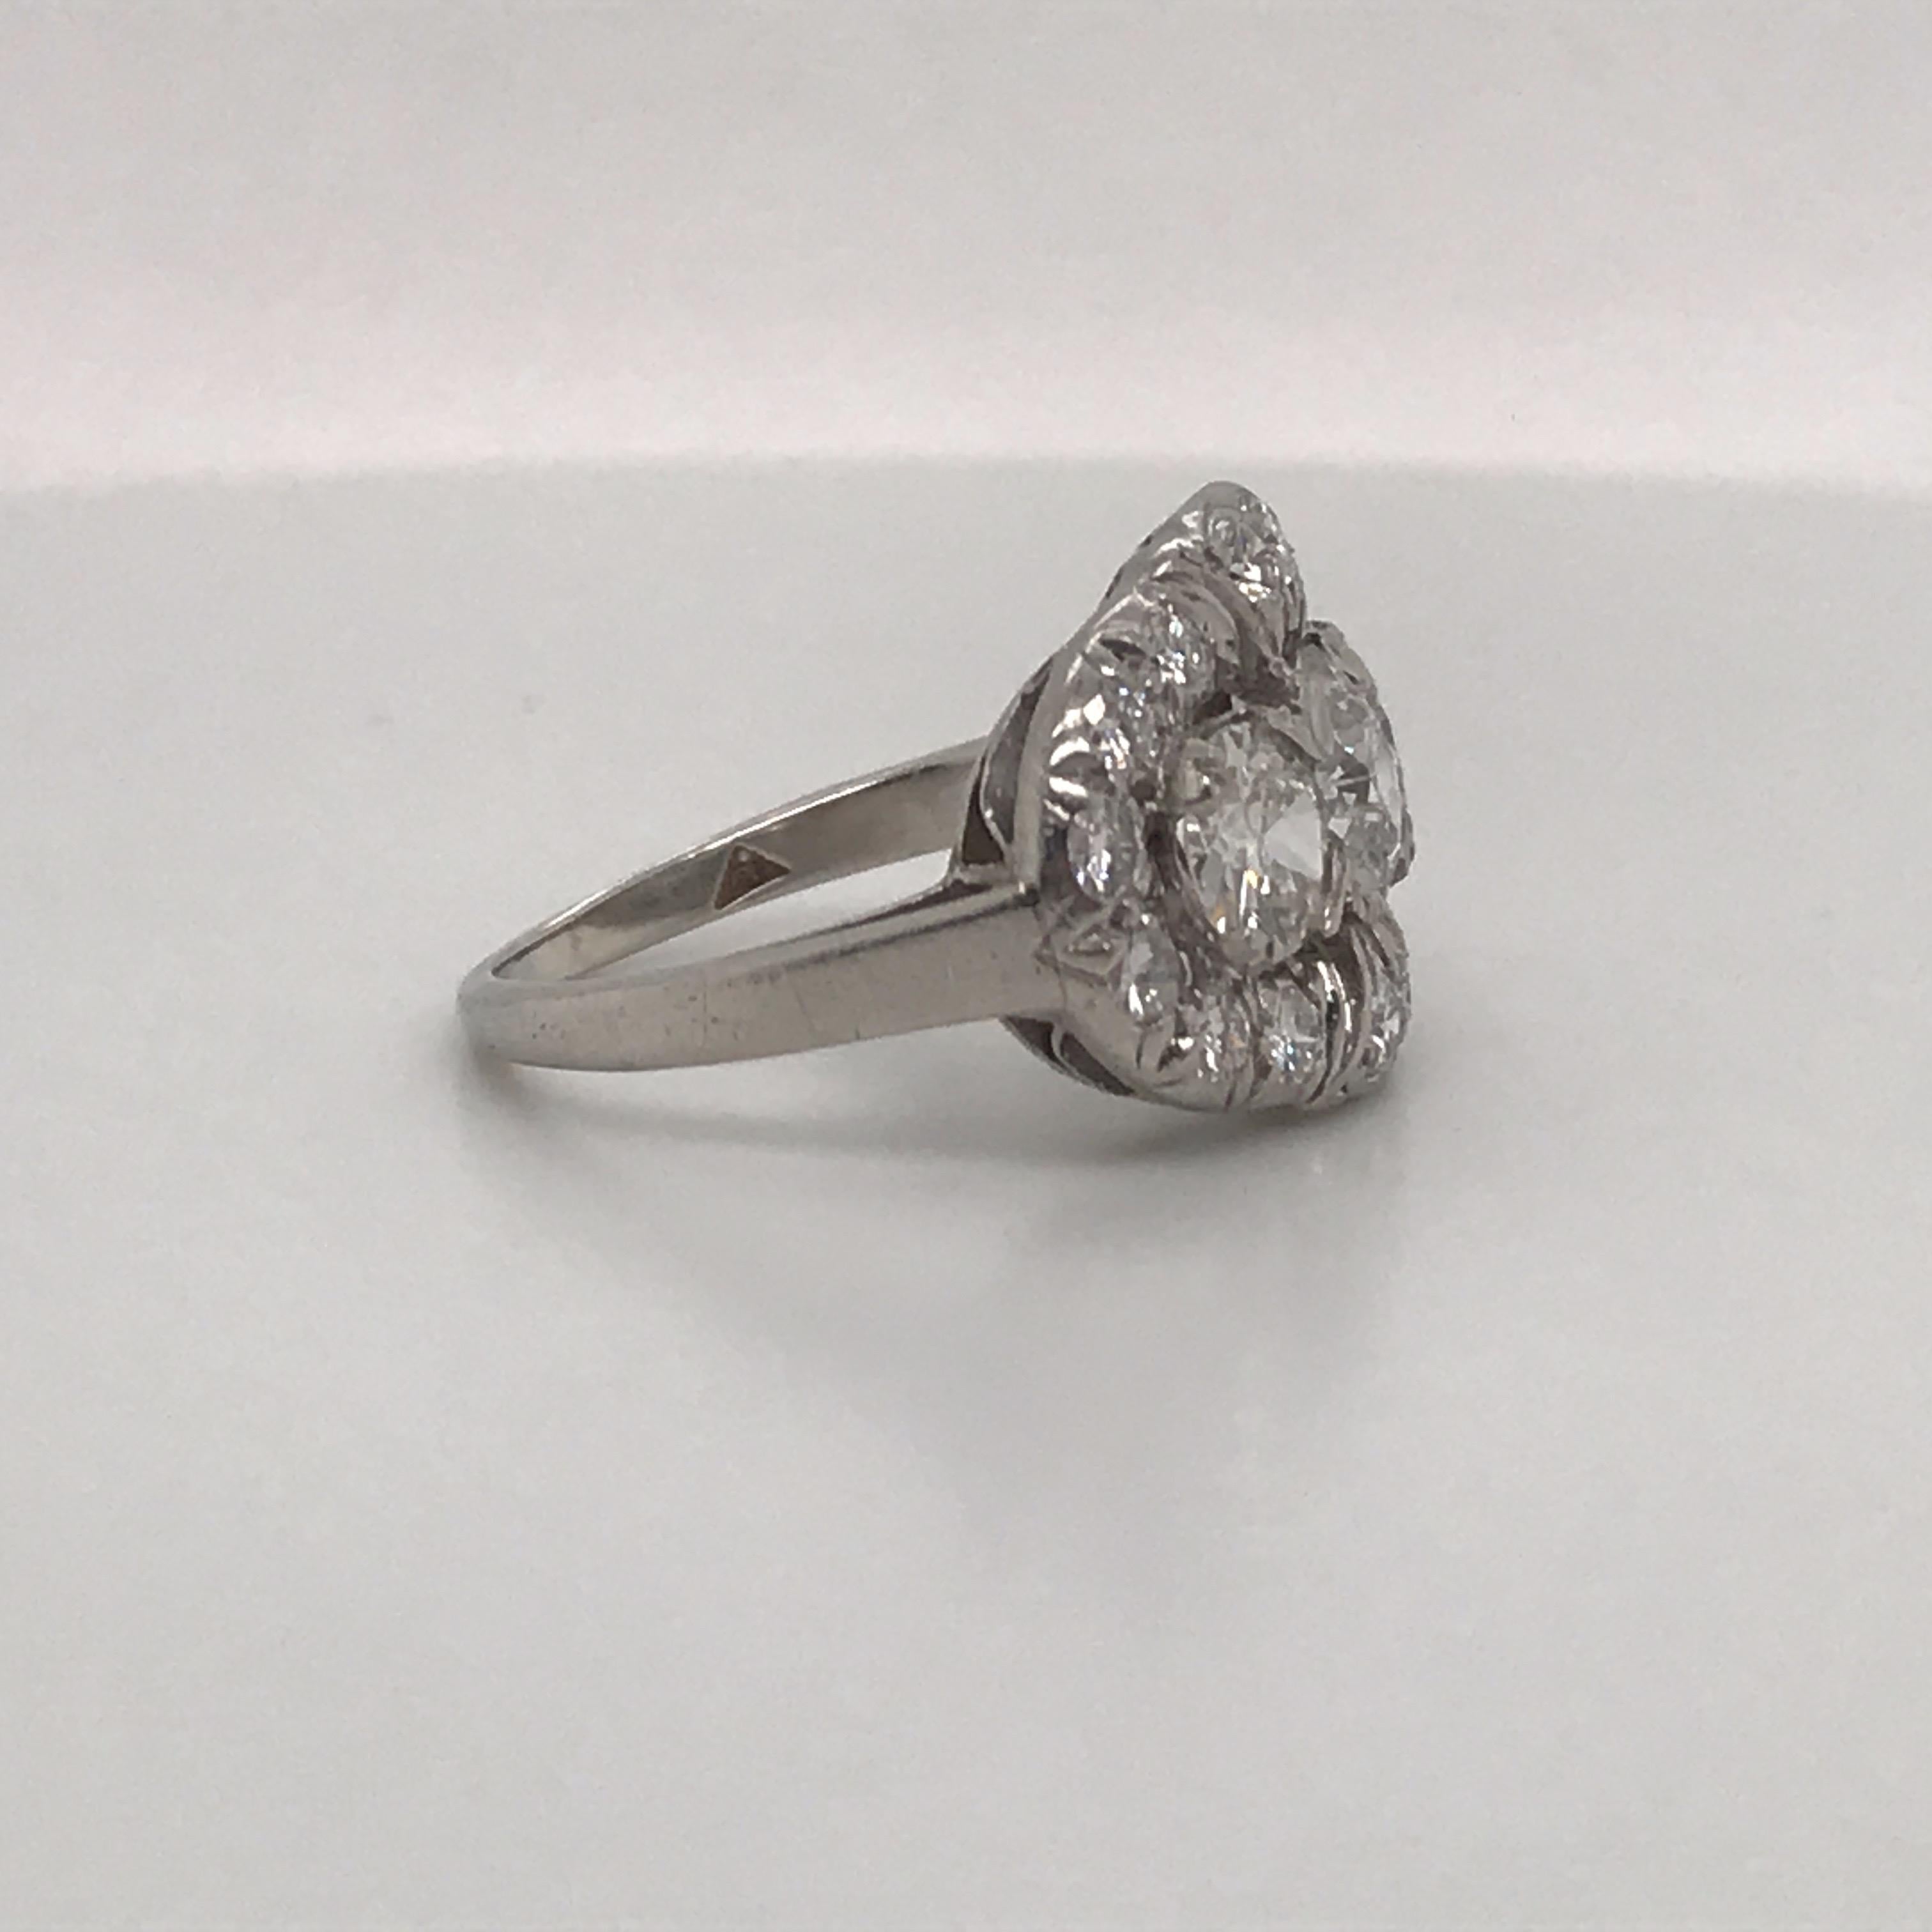 Vintage Three-Stone Diamond Ring Platinum 2 Carat In Excellent Condition For Sale In New York, NY